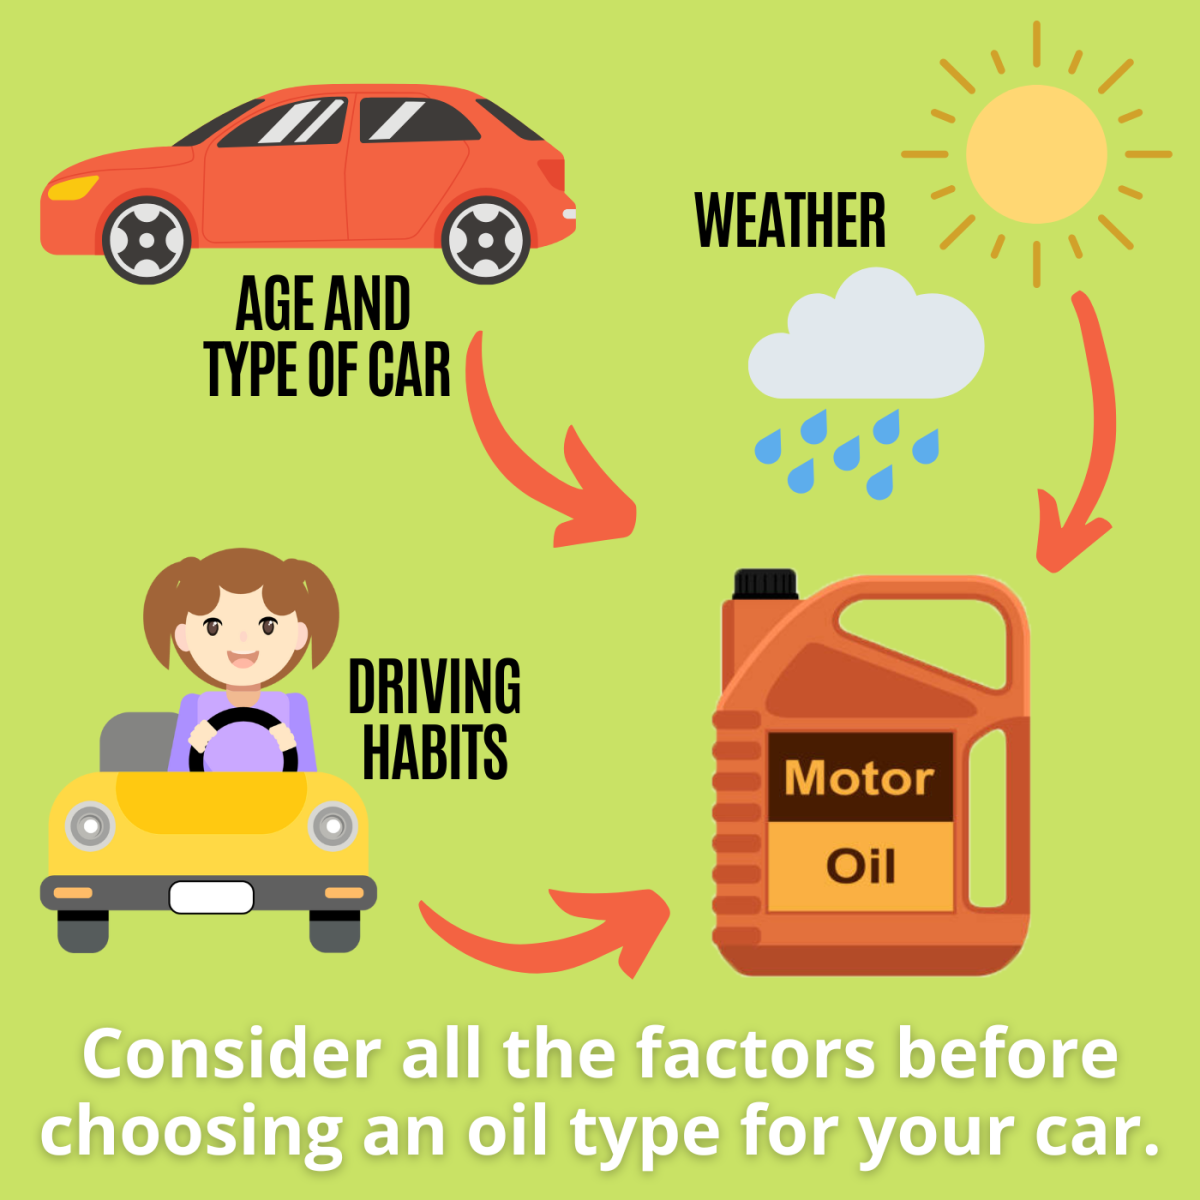 Keep in mind your personal driving considerations when selecting an oil for your vehicle.